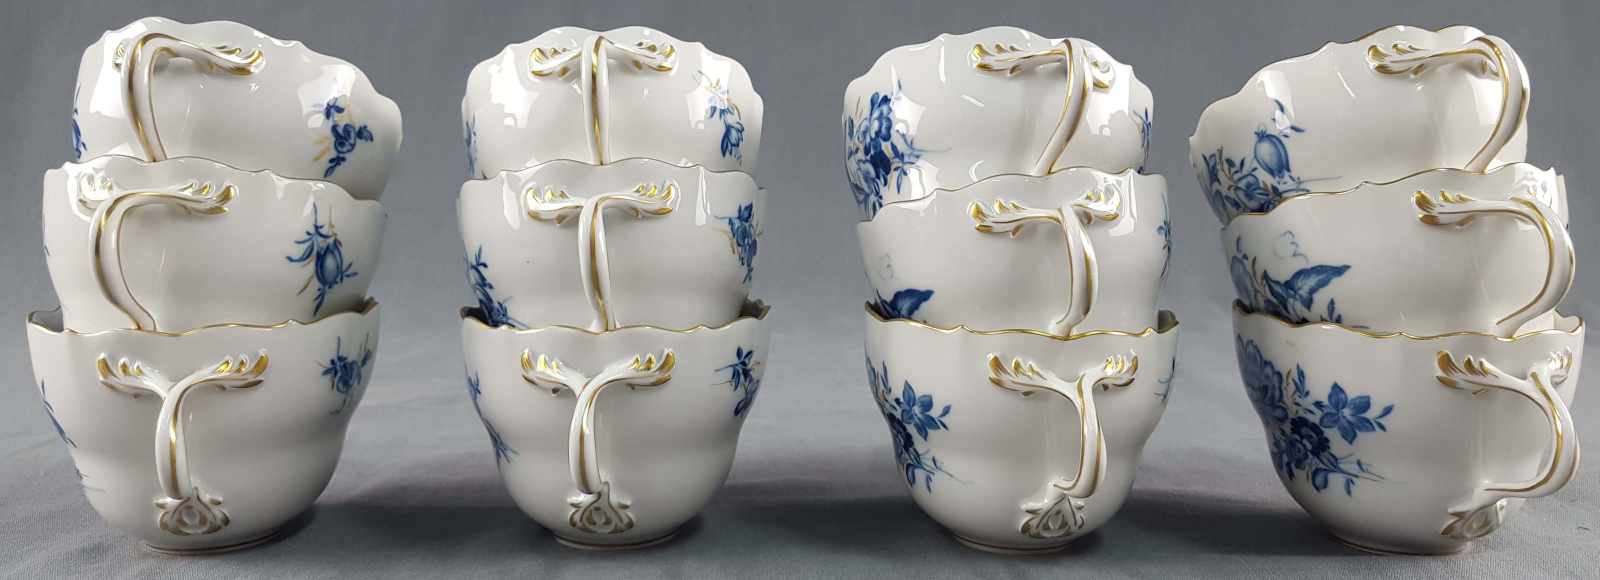 Coffee service Meissen porcelain for 12 persons. No coffee pot. - Image 5 of 19